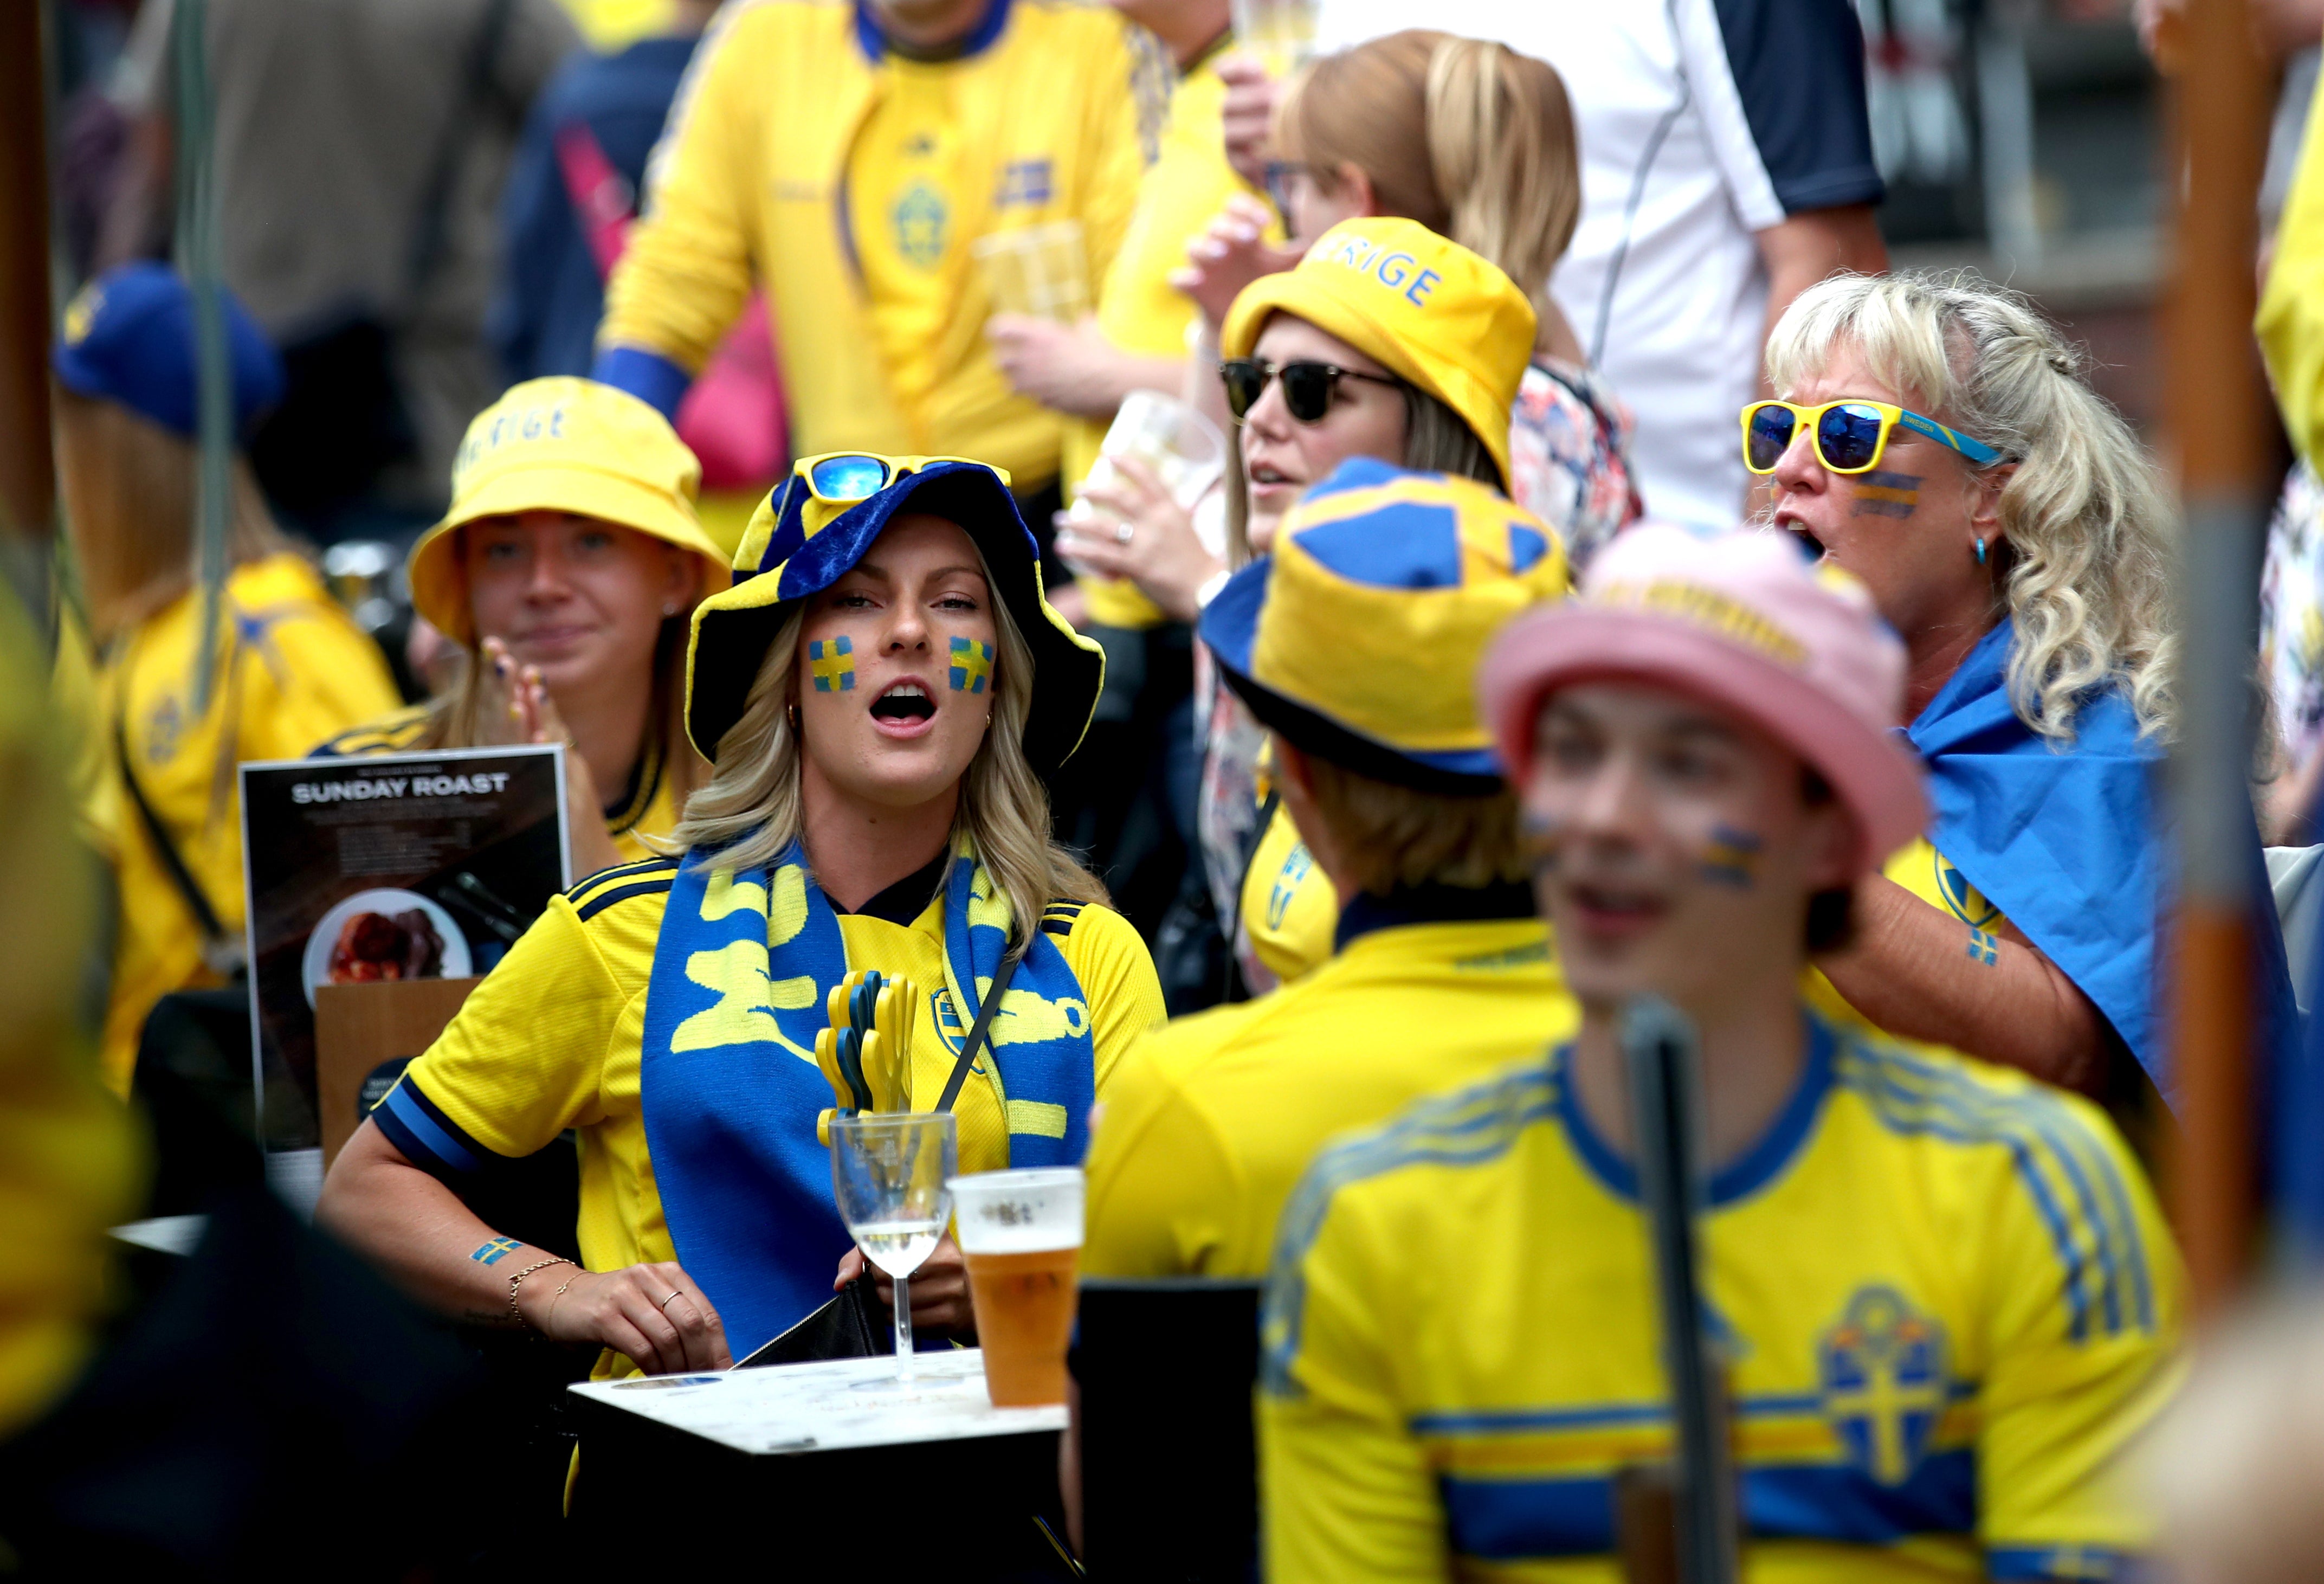 Sweden in in Sheffield ahead of semi-final showdown with England | The Independent